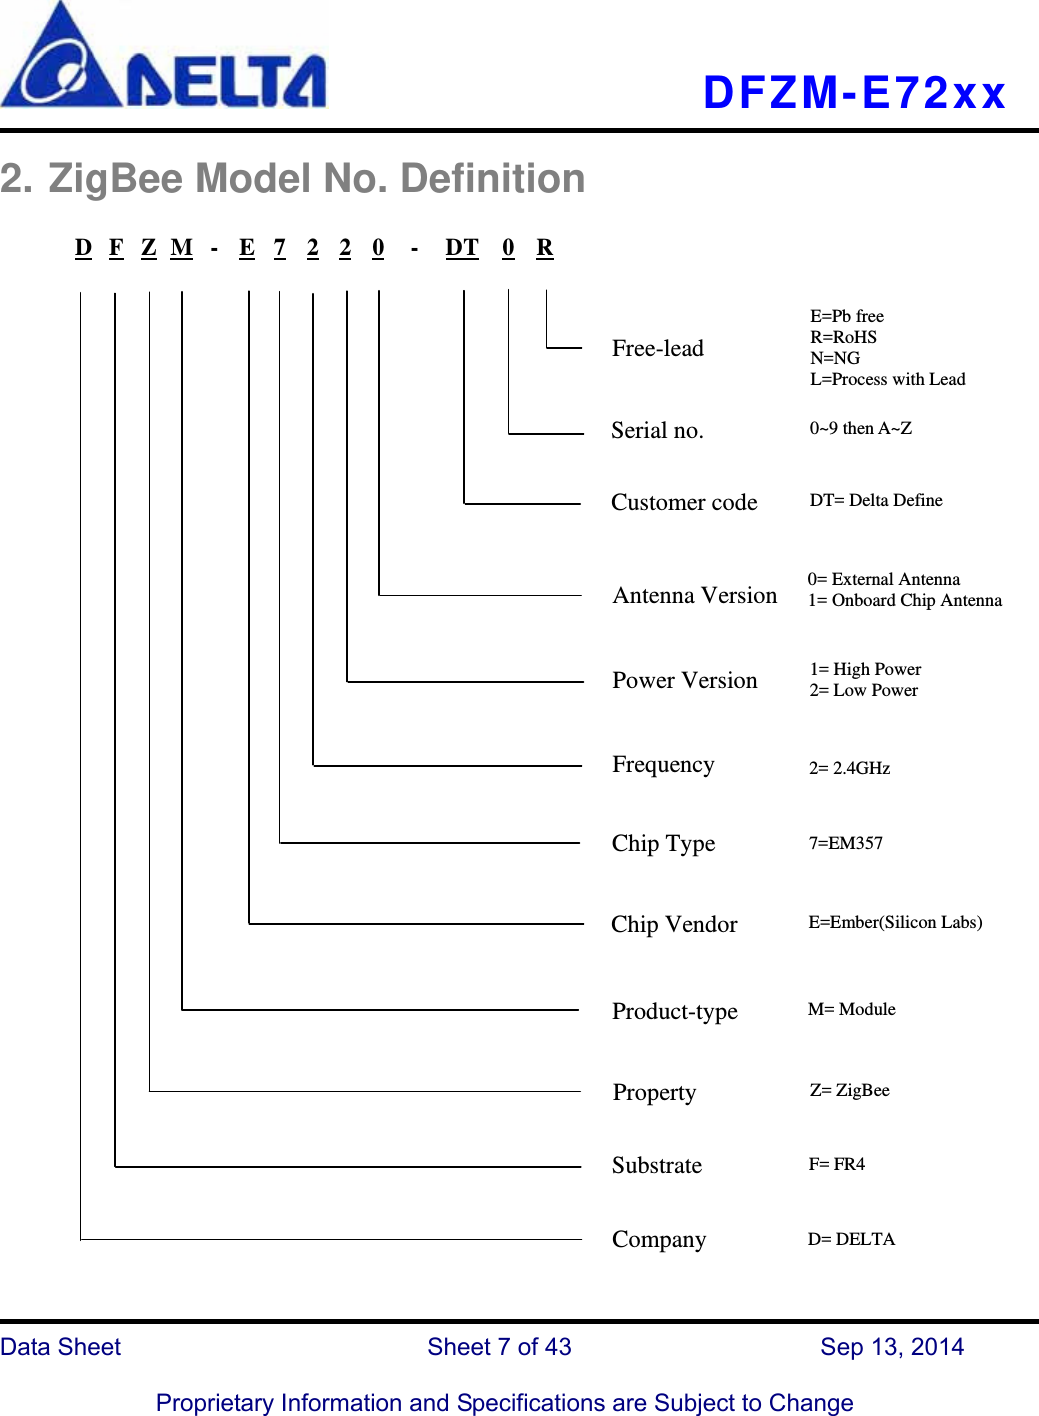   DFZM-E72xx   Data Sheet                 Sheet 7 of 43           Sep 13, 2014  Proprietary Information and Specifications are Subject to Change 2. ZigBee Model No. Definition                         D F Z M - E 7 2 2 0 -DT0 R1= High Power 2= Low Power E=Pb free R=RoHS N=NG L=Process with Lead Customer code Antenna Version Free-lead Power Version Frequency M= Module Z= ZigBee F= FR4 D= DELTA 2= 2.4GHz Chip Vendor Product-type Property Substrate Company E=Ember(Silicon Labs) 0= External Antenna 1= Onboard Chip Antenna DT= Delta DefineChip Type  7=EM357 0~9 then A~Z Serial no. 